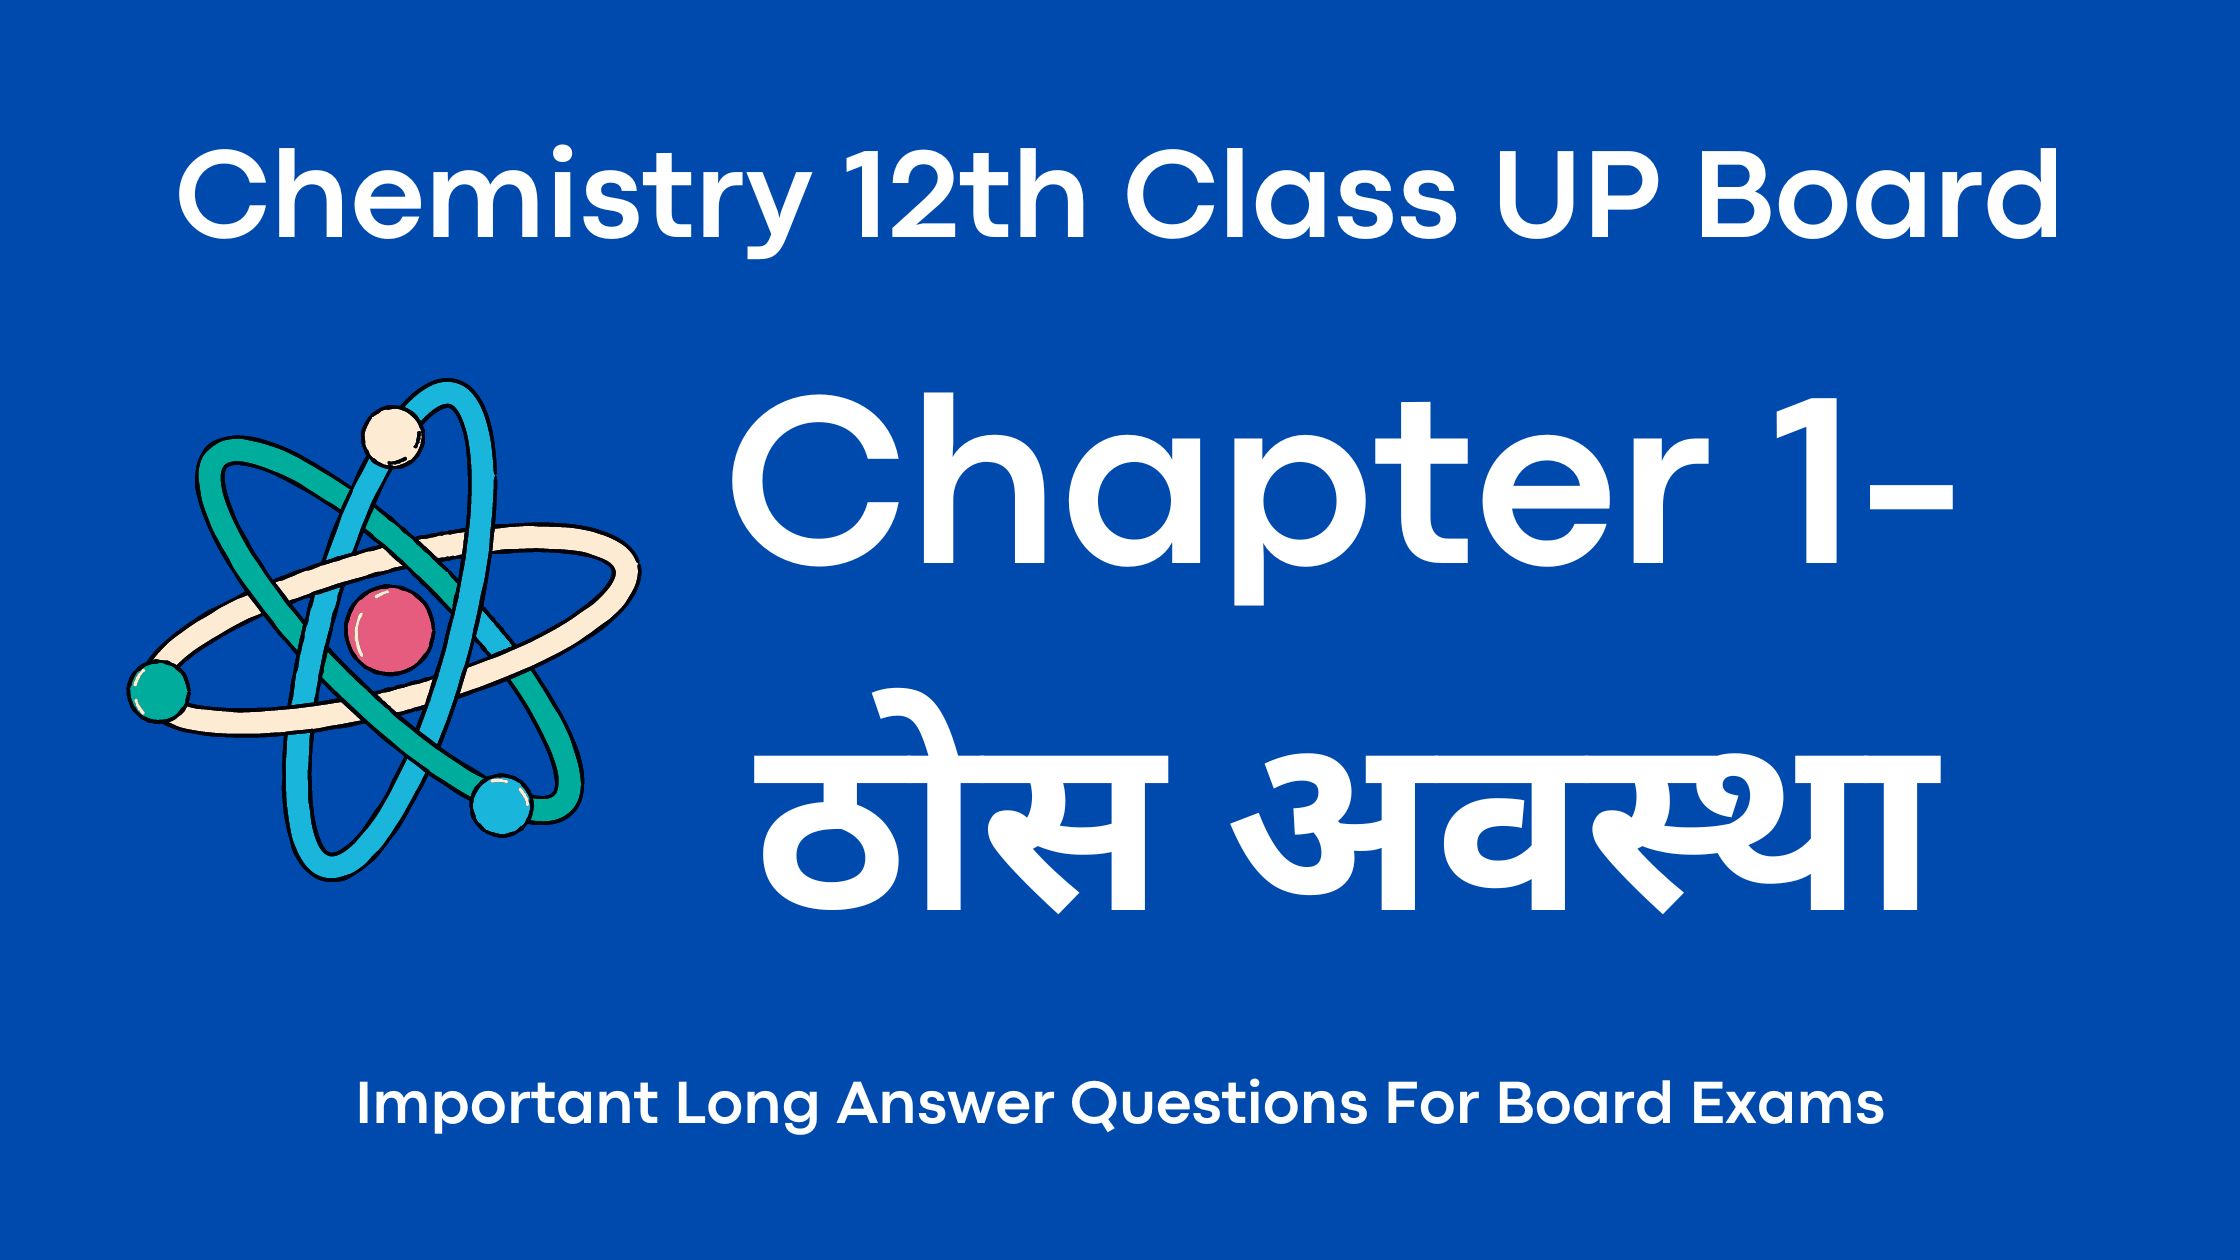 Chapter 1- ठोस अवस्था Long Answers (Chemistry 12th Class UP Board)